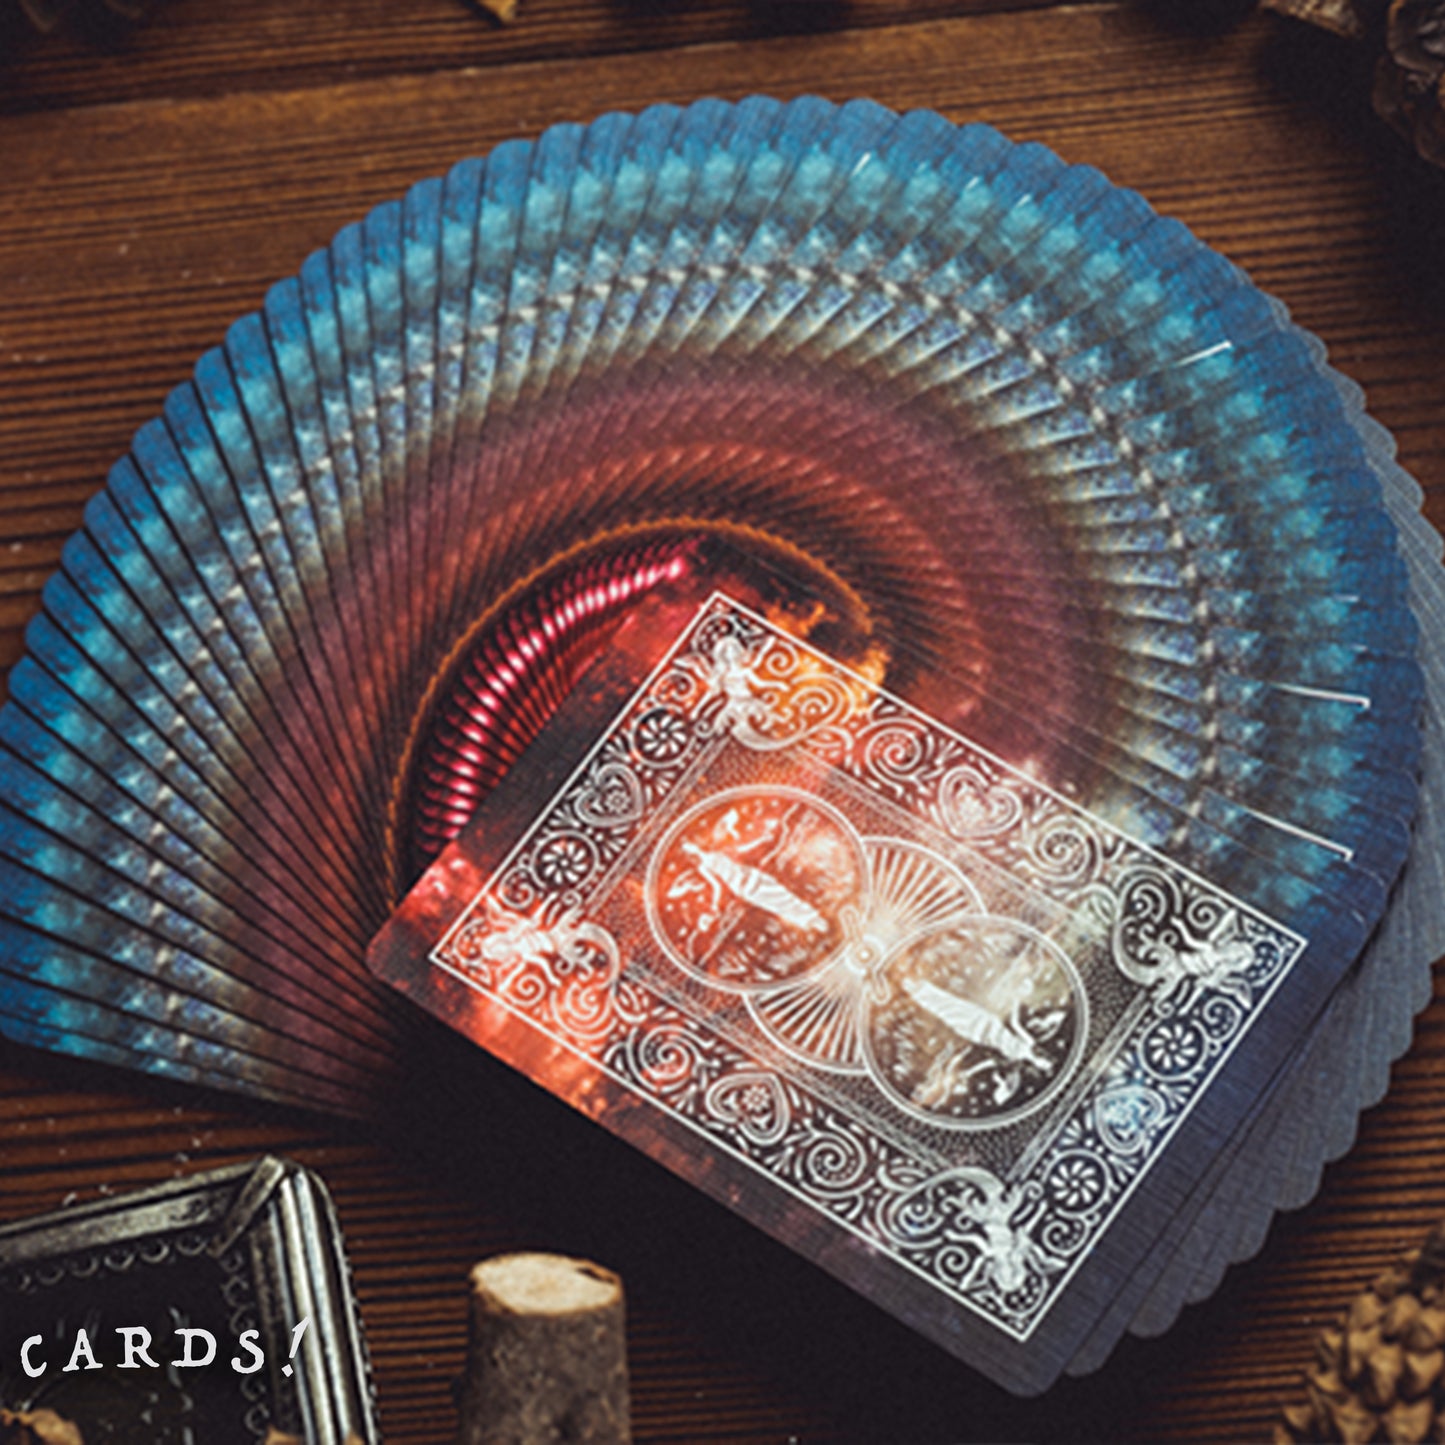 Bicycle® Constellation (Scorpio) Playing Cards